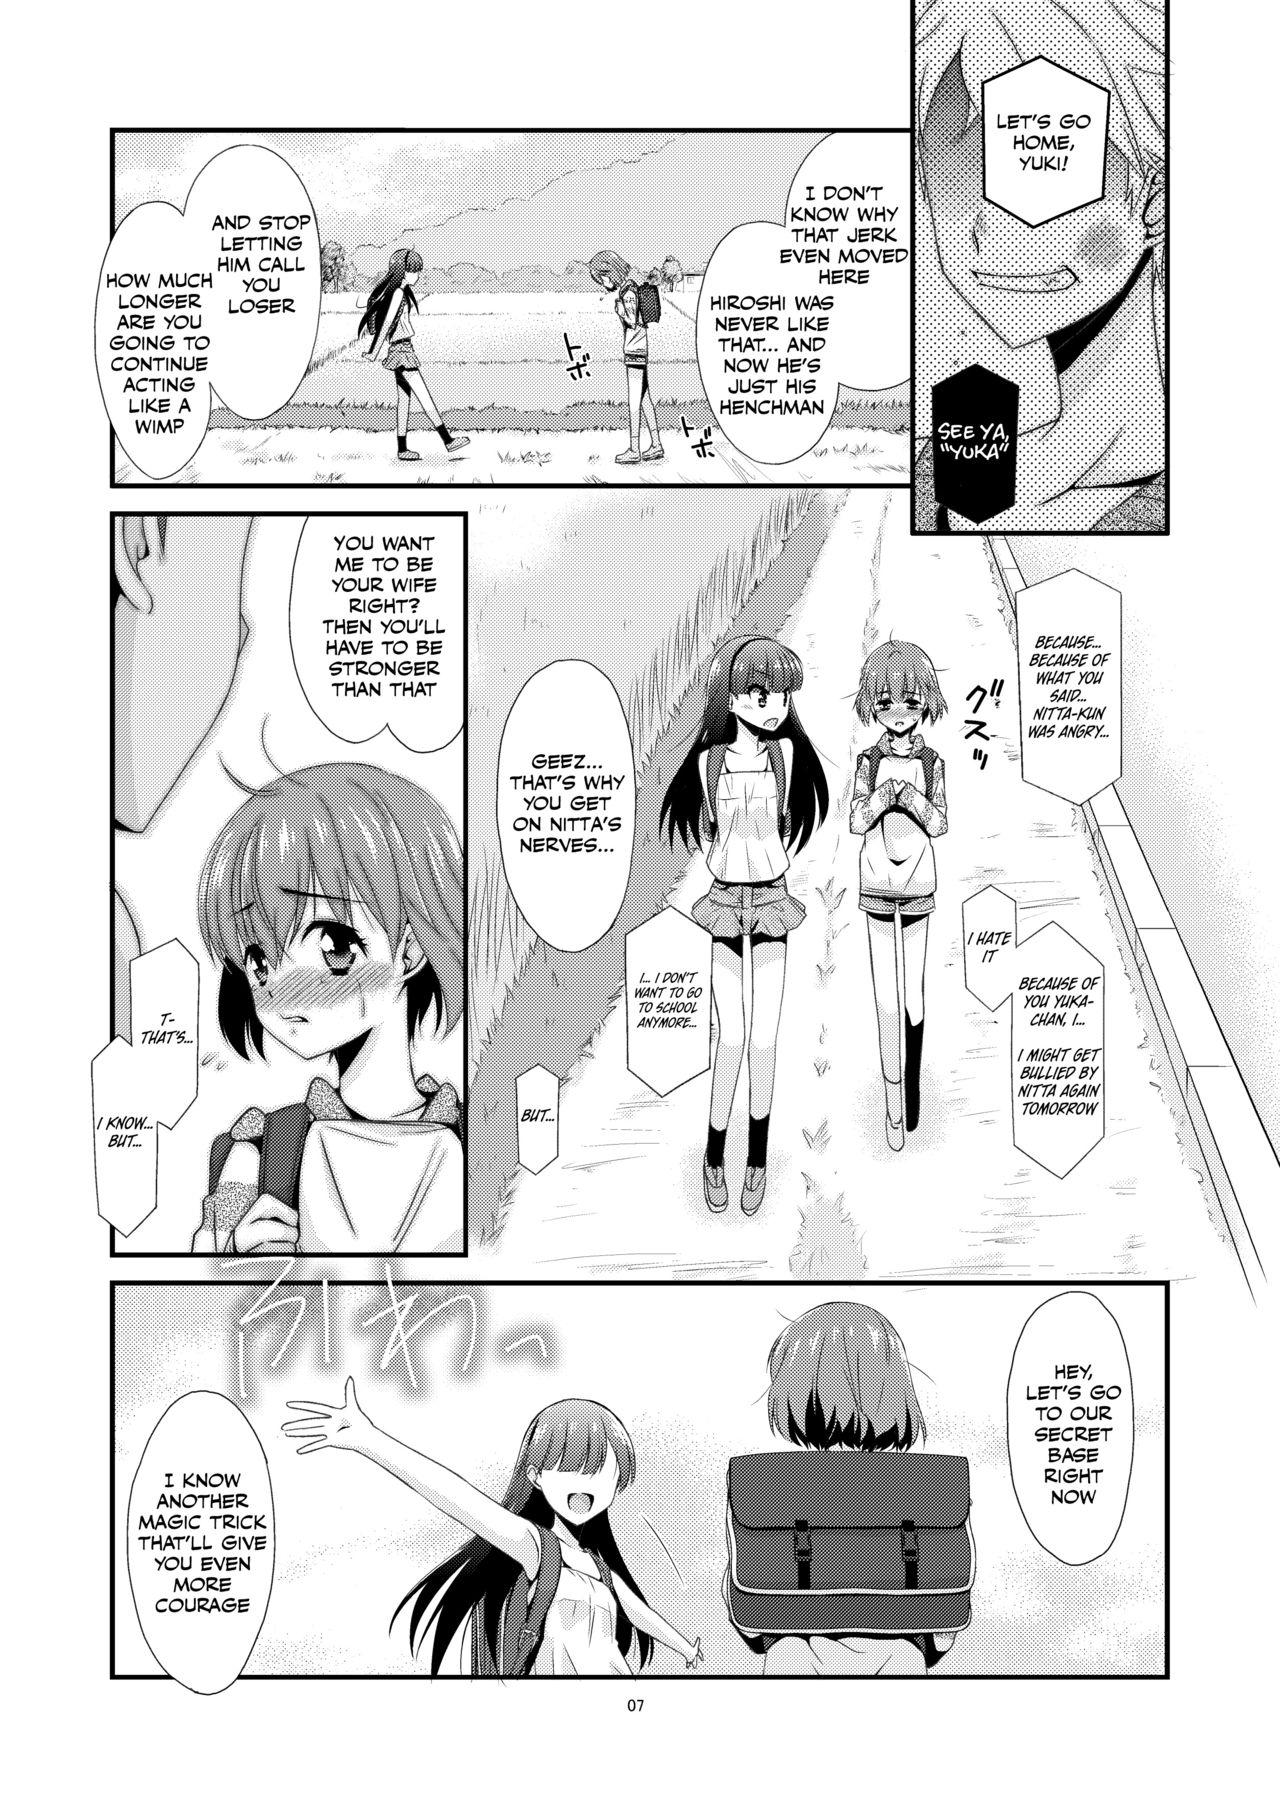 Pierced The Day That Girl Became His Plaything: Yuka Okabe Edition - Original Gay Money - Page 7